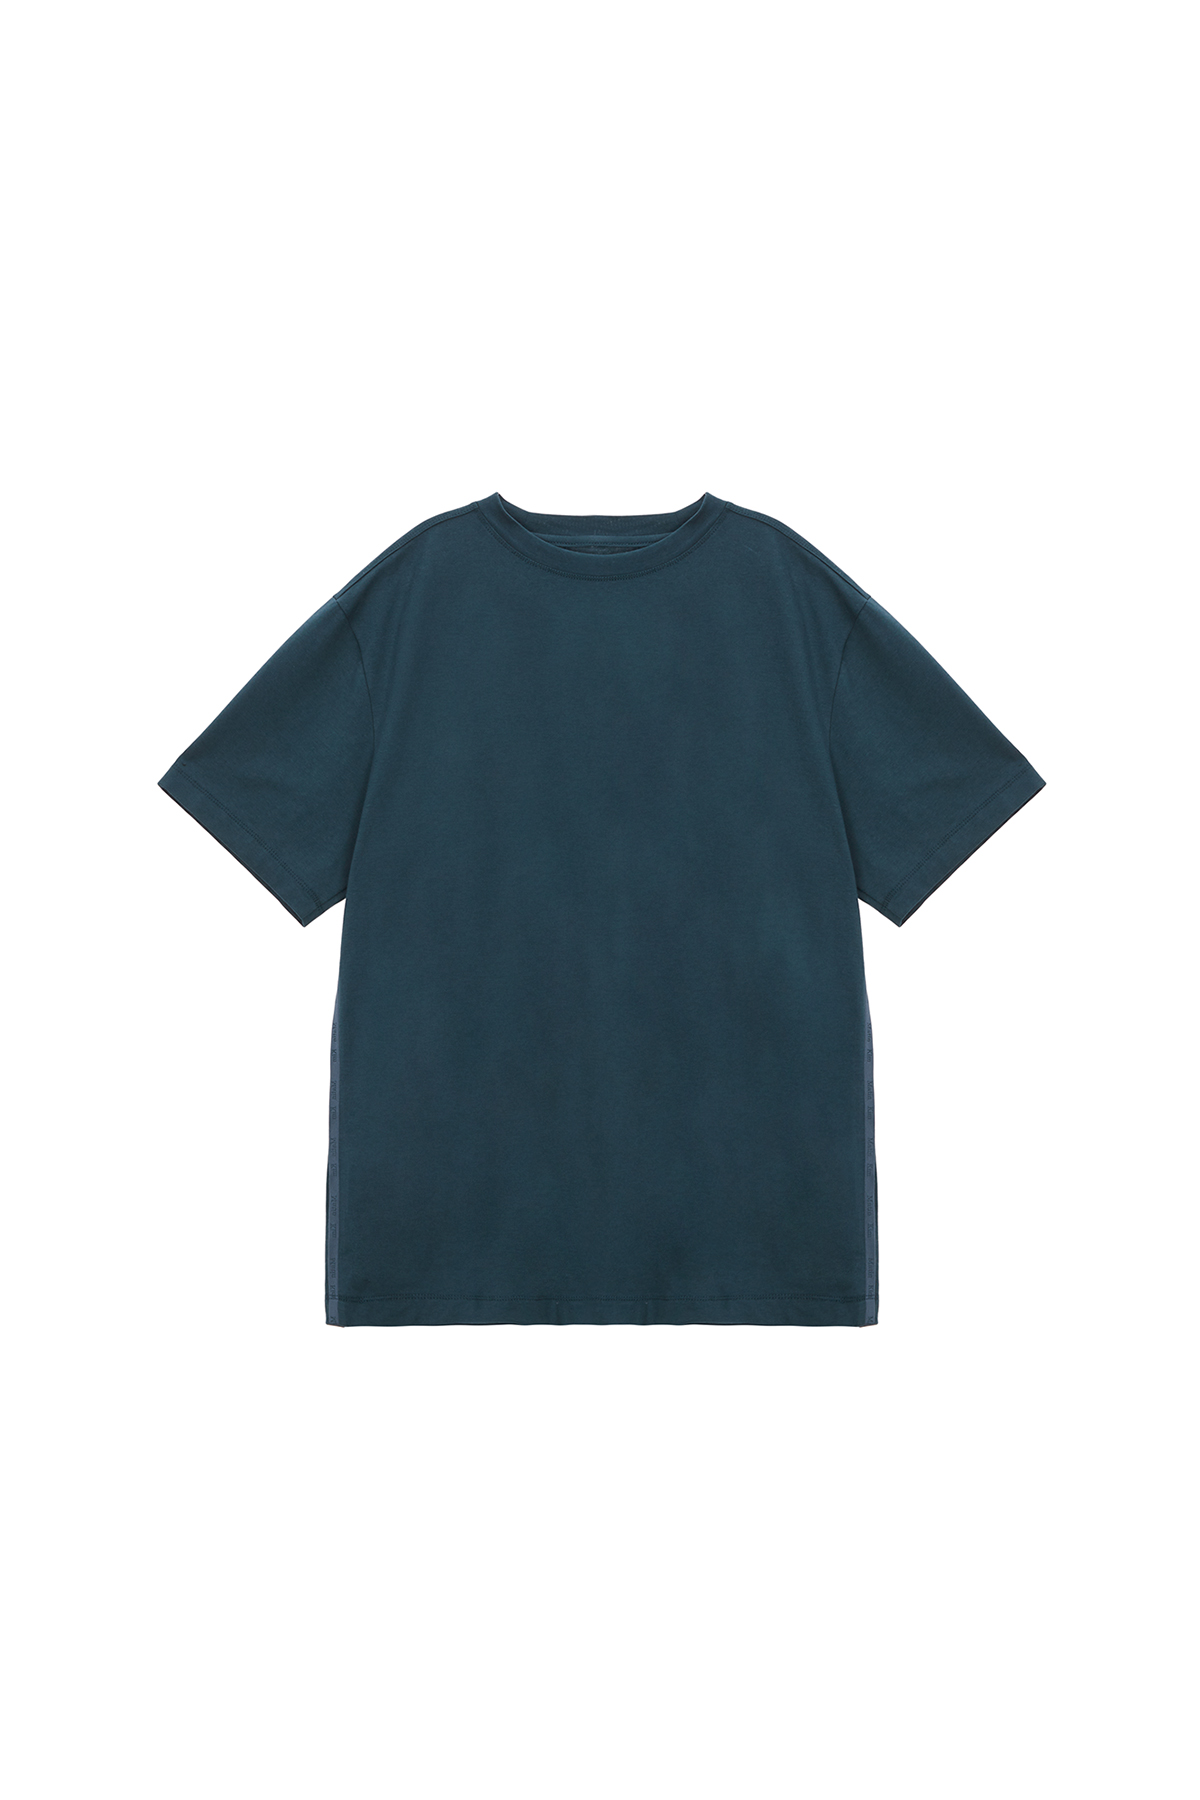 SIDE LOGO TAPING BOXY TOP IN GREEN